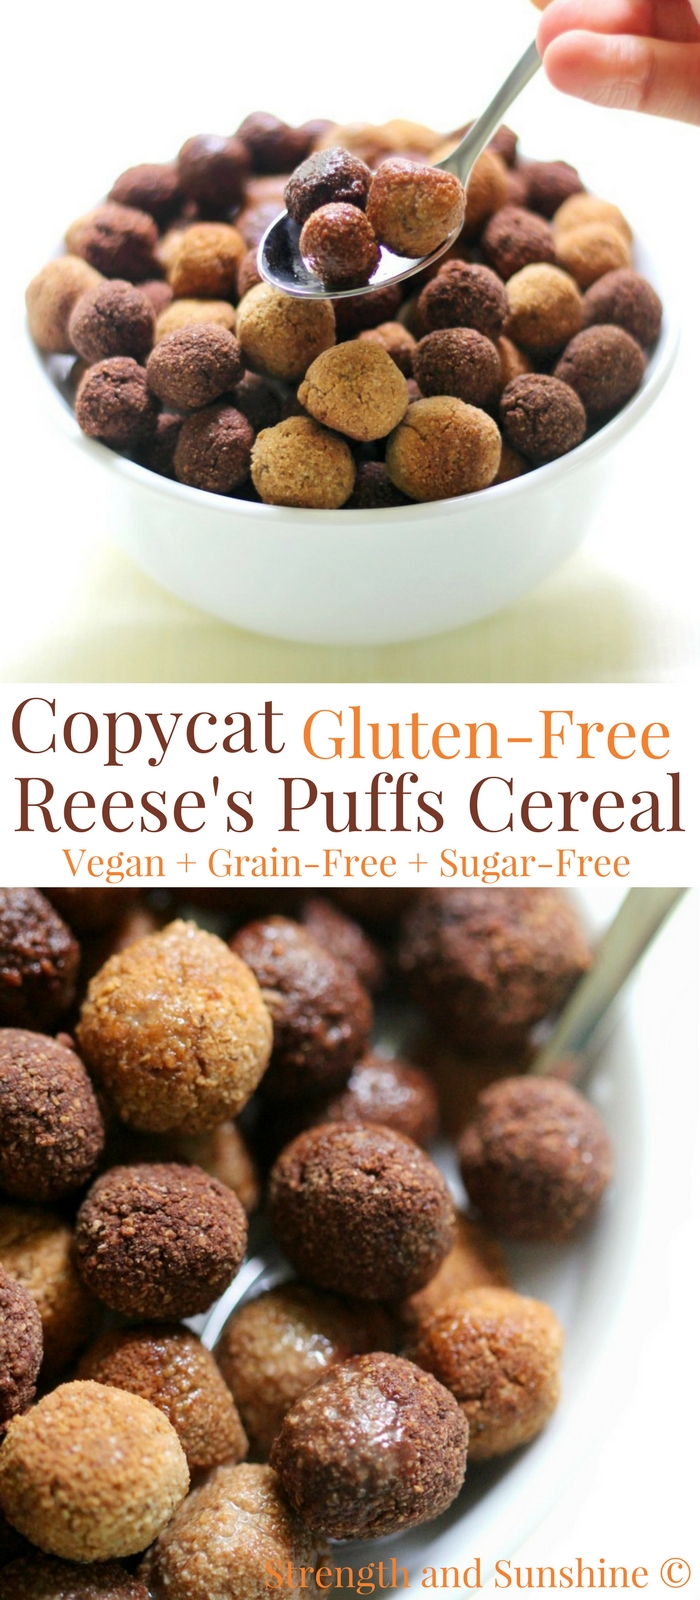 Copycat Gluten-Free Reese's Puffs Cereal (Vegan, Grain-Free) | Strength and Sunshine @RebeccaGF666 Healthy, protein-packed, homemade cereal for breakfast? You will love this recipe for Copycat Gluten-Free Reese's Puffs Cereal that's vegan, grain-free, and sugar-free! Chocolate and peanut butter flavors are just what you need to kickstart your day! #cereal #reeses #breakfast #glutenfree #vegan #grainfree #sugarfree #kidfriendly